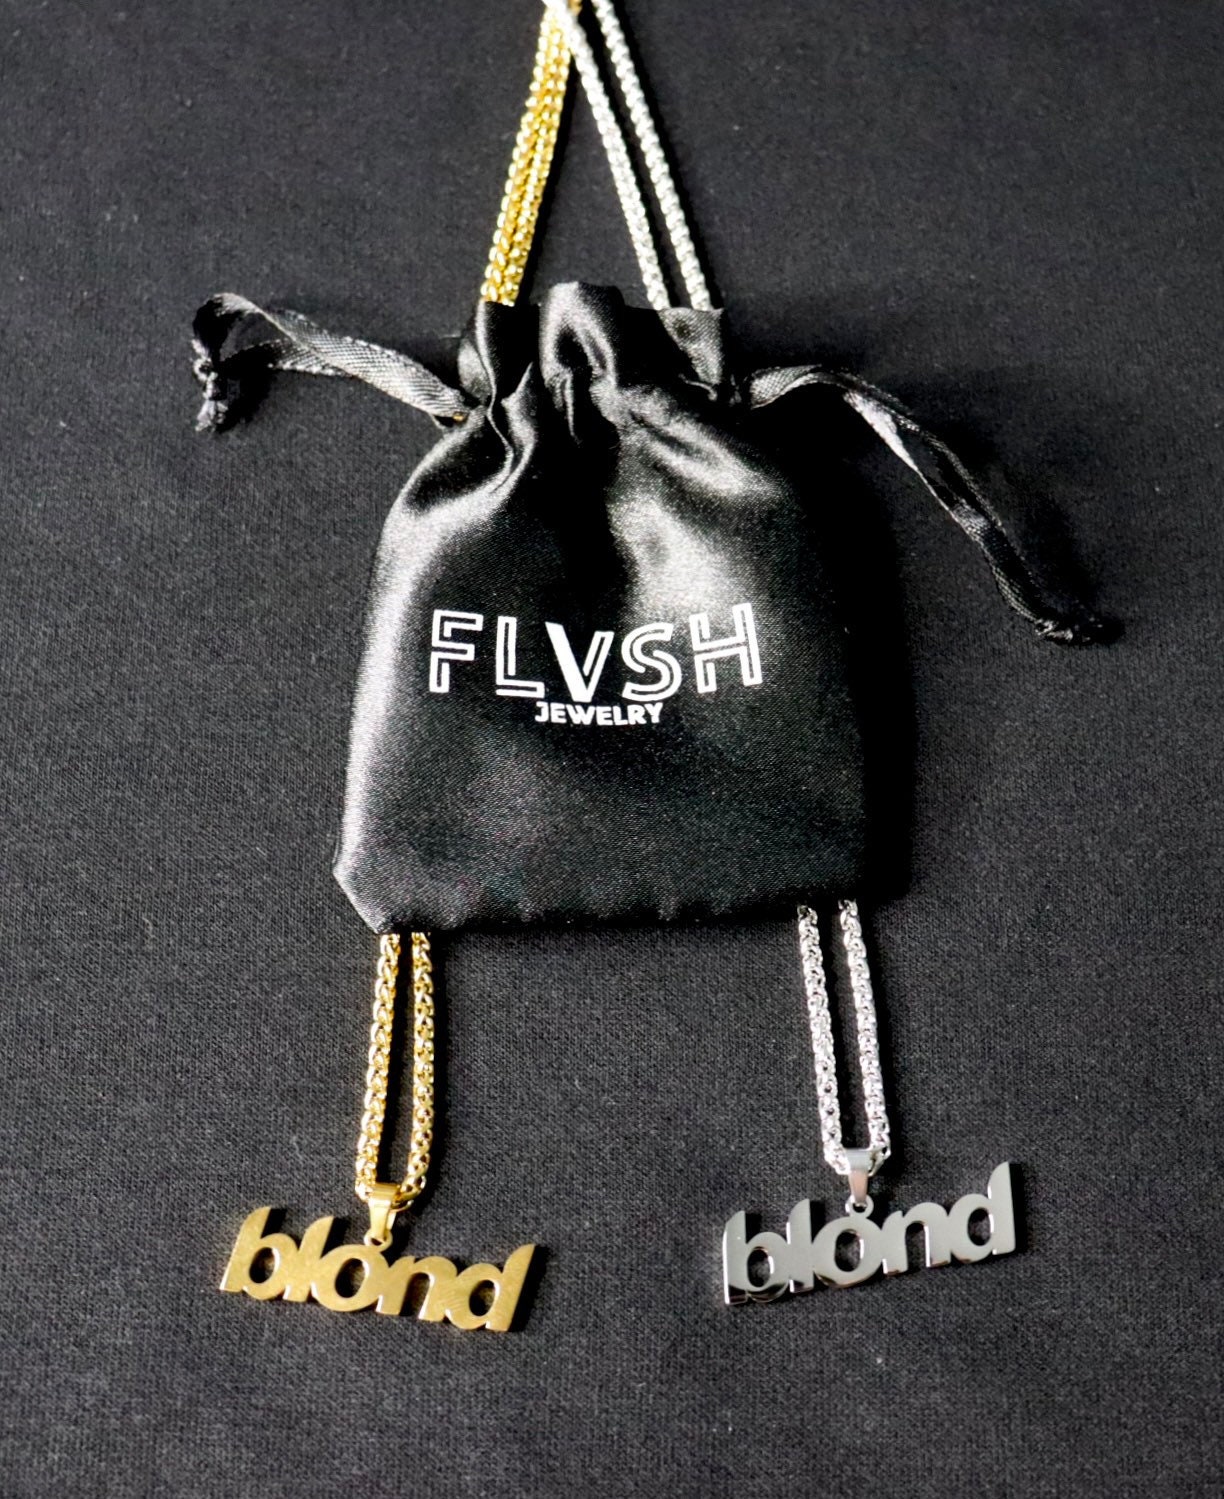 Blond Stainless Steel Necklace – Gifts From The Crypt